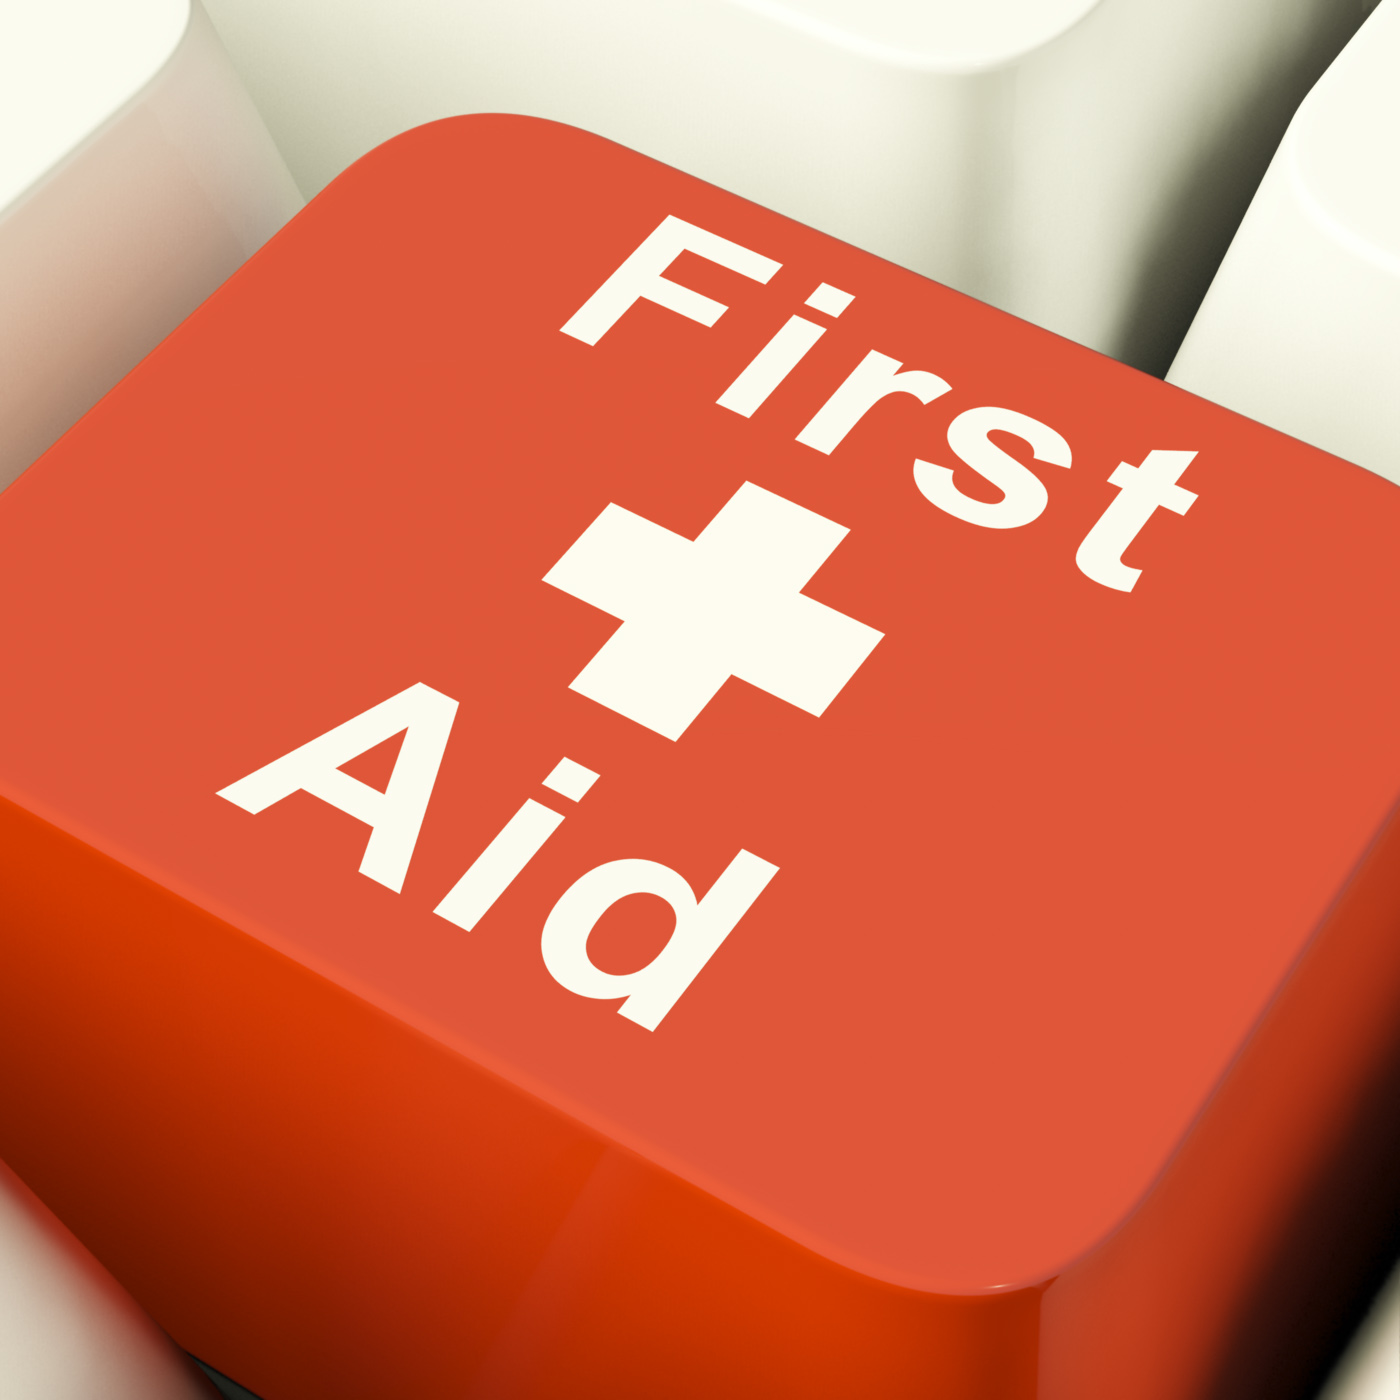 First aid computer key showing emergency medical help photo